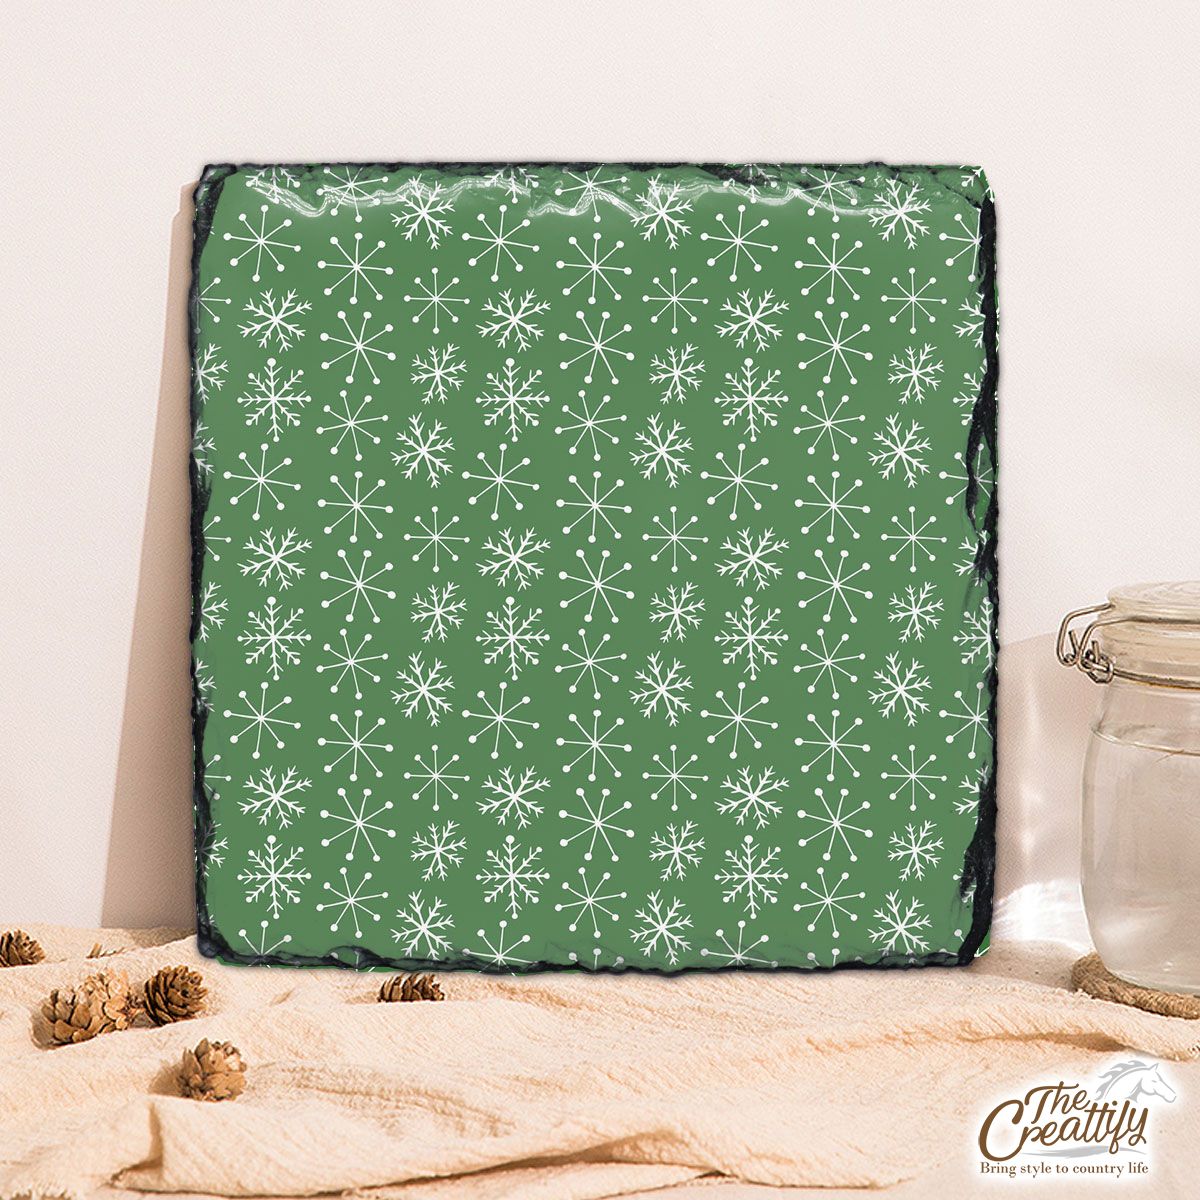 Green And White Snowflake Square Lithograph